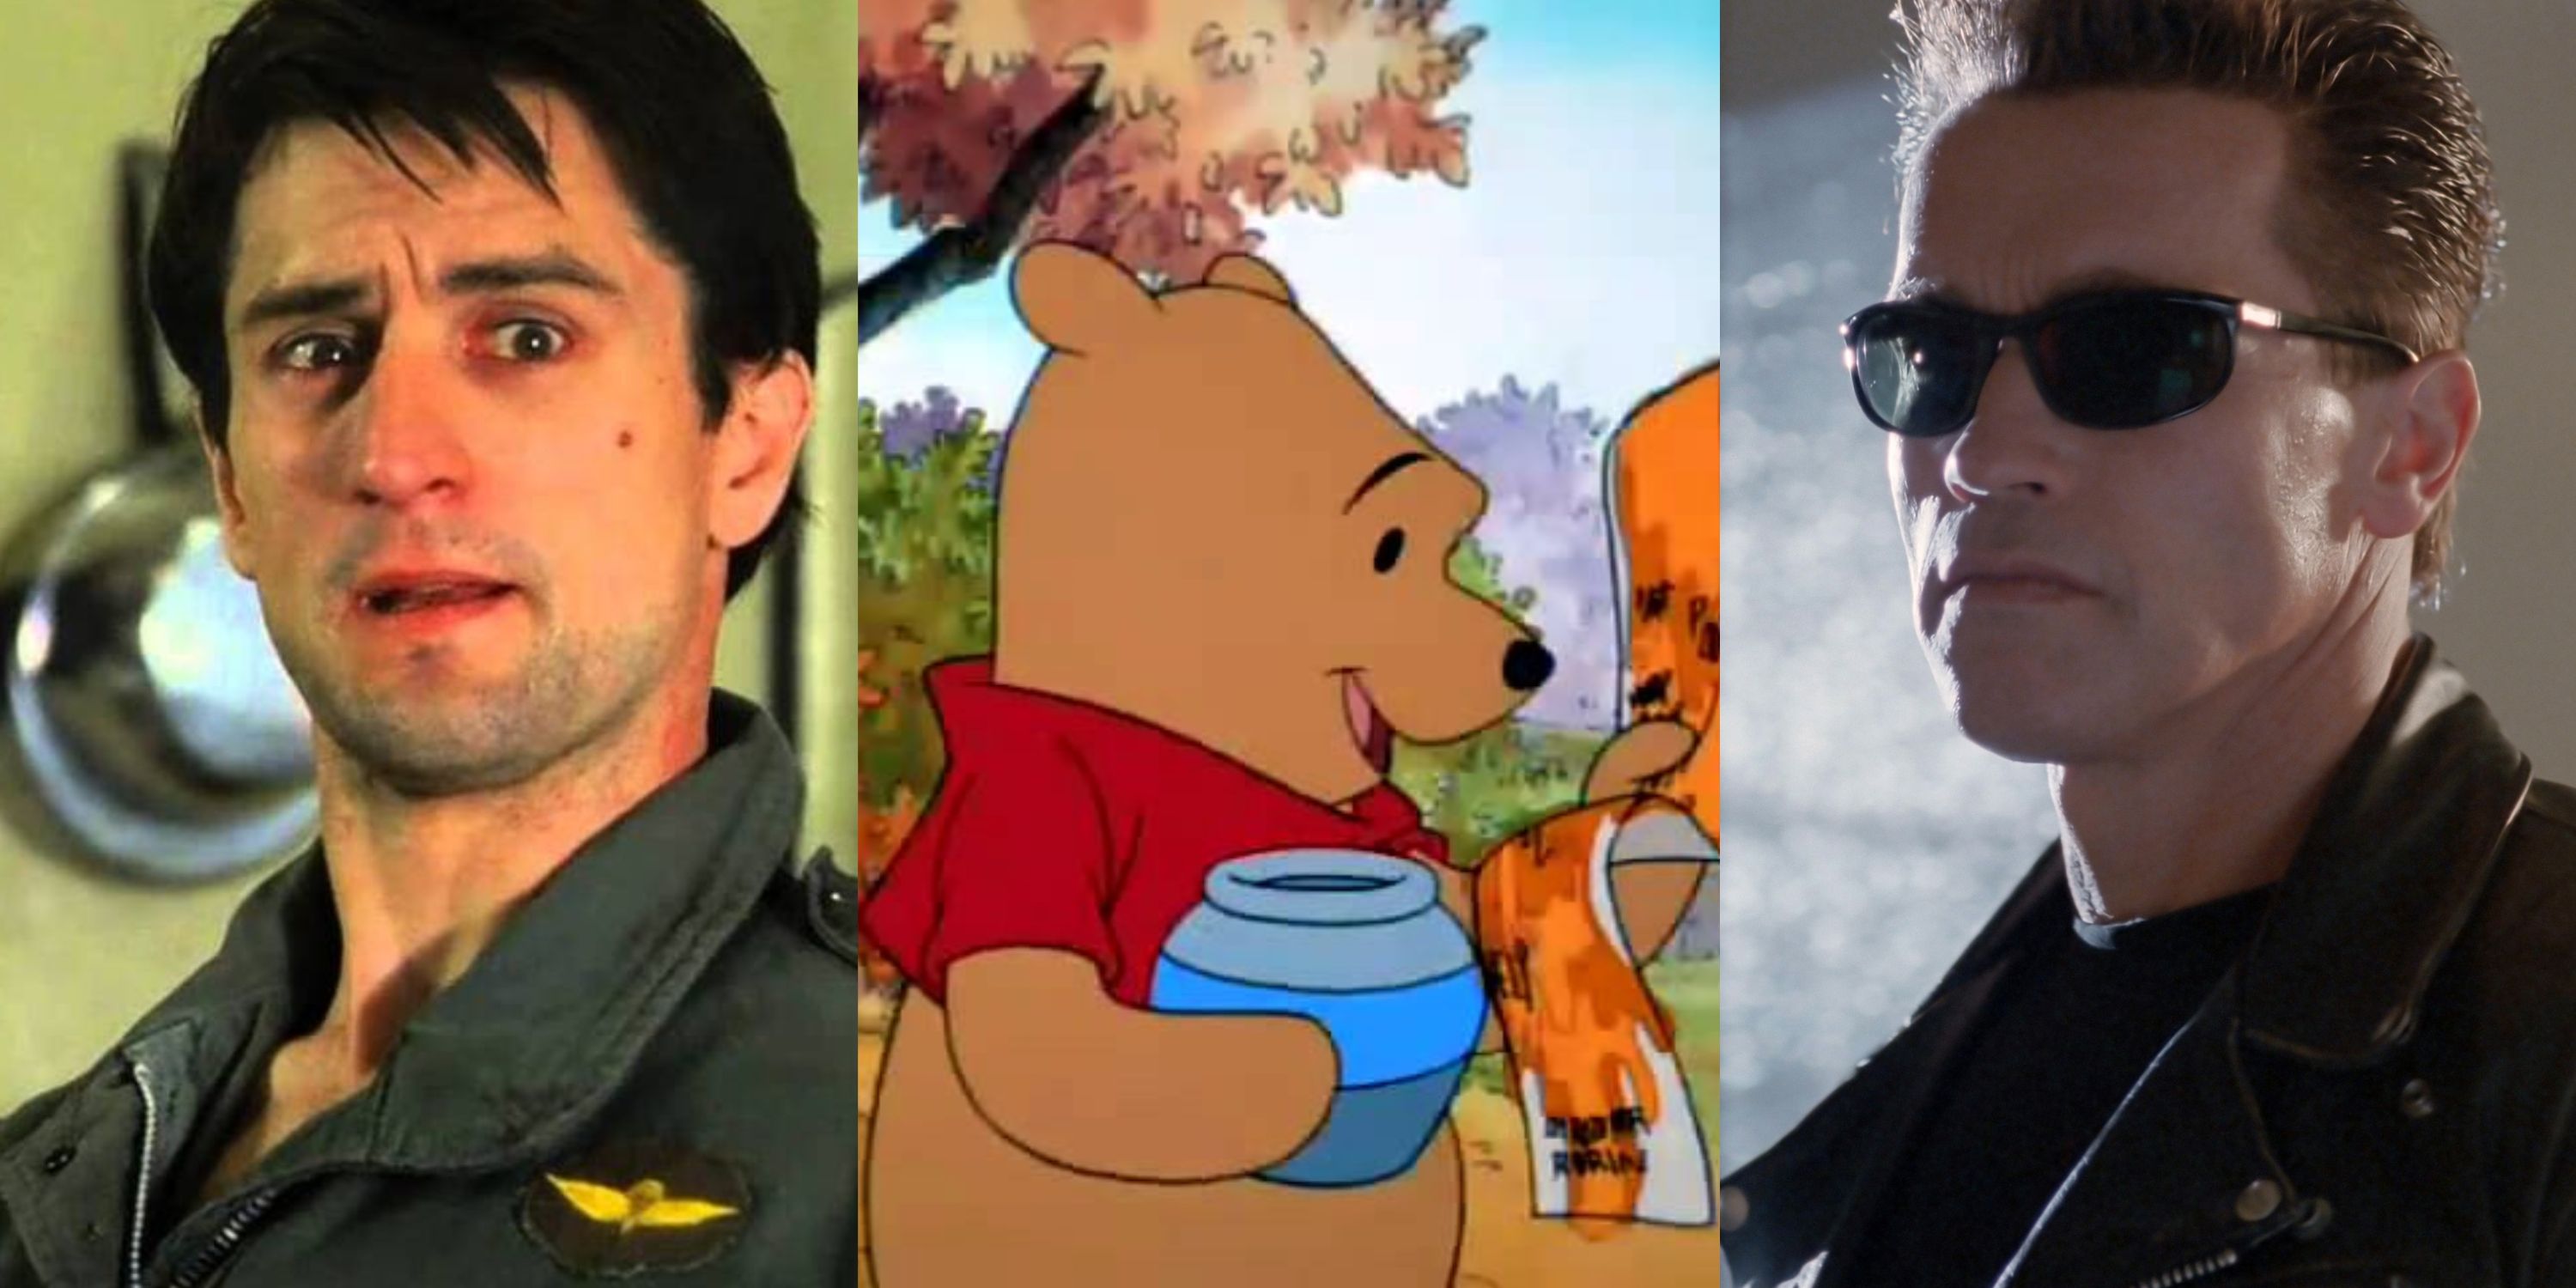 Split image of Robert De Niro in taxi driver uniform looking at screen shocked, Winnie the Pooh holding honey and a honey-filled piece of paper, and the Terminator wearing glasses